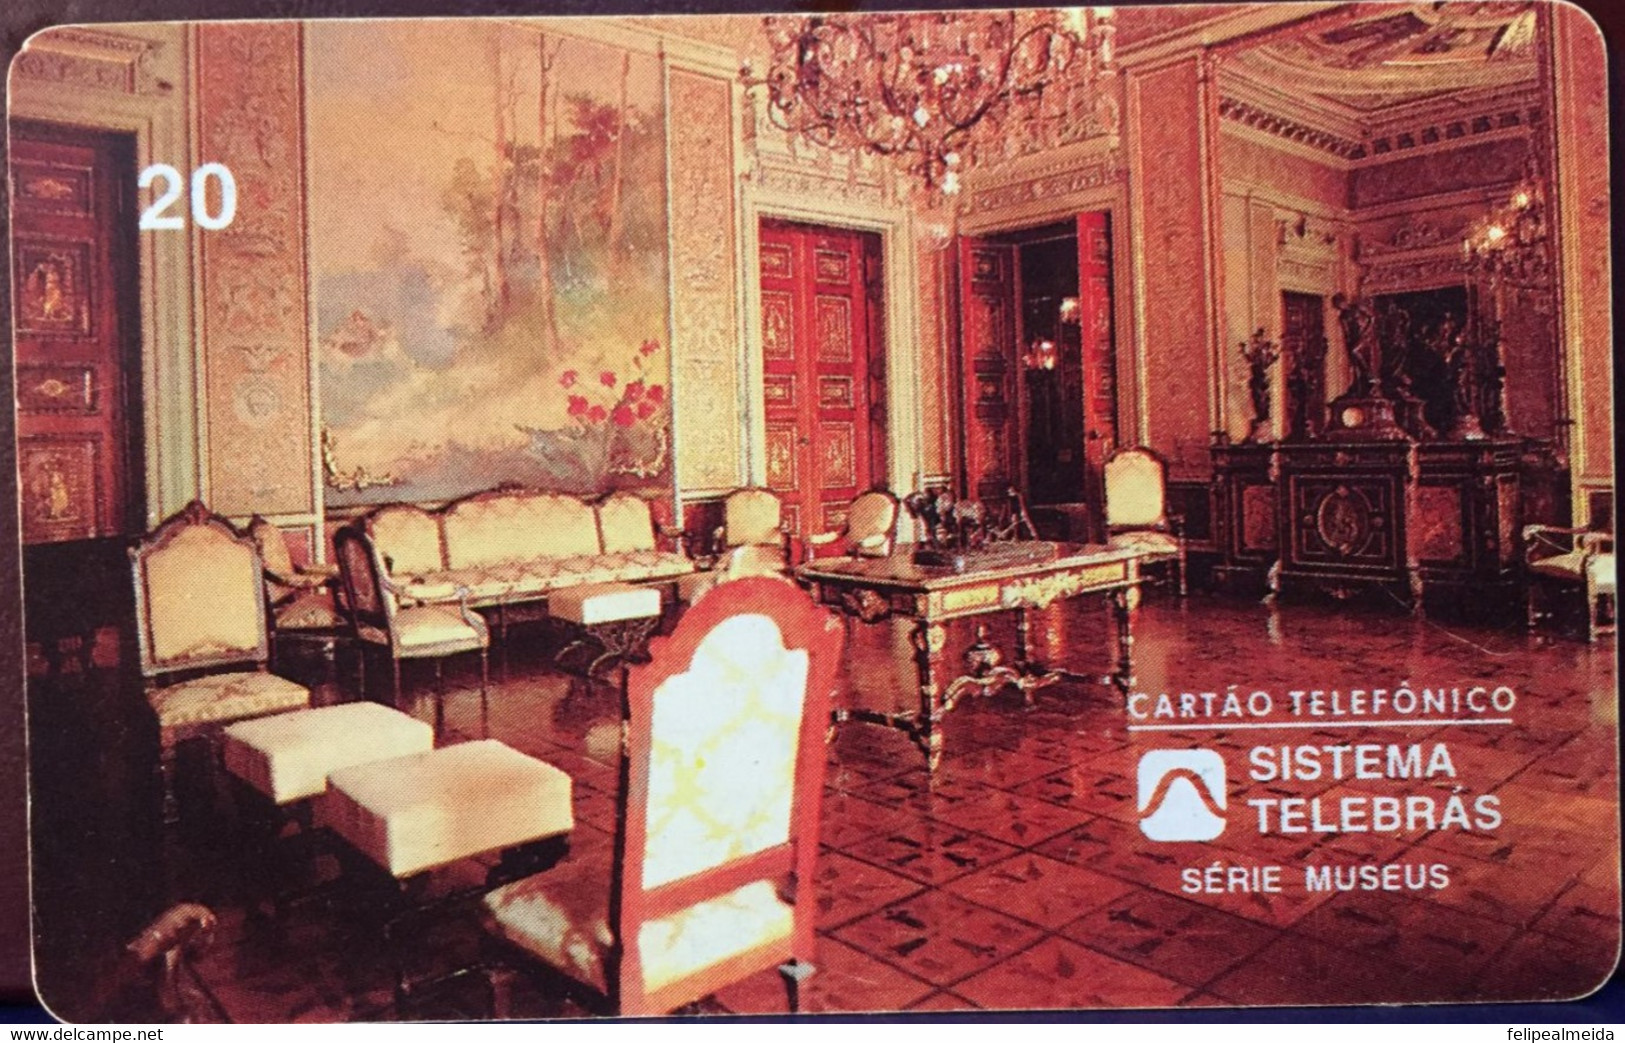 Phone Card Manufactured By Telebras In 1996 - Series Museums - Museum Of The Republic Of Rio De Janeiro - Venetian H - Cultura